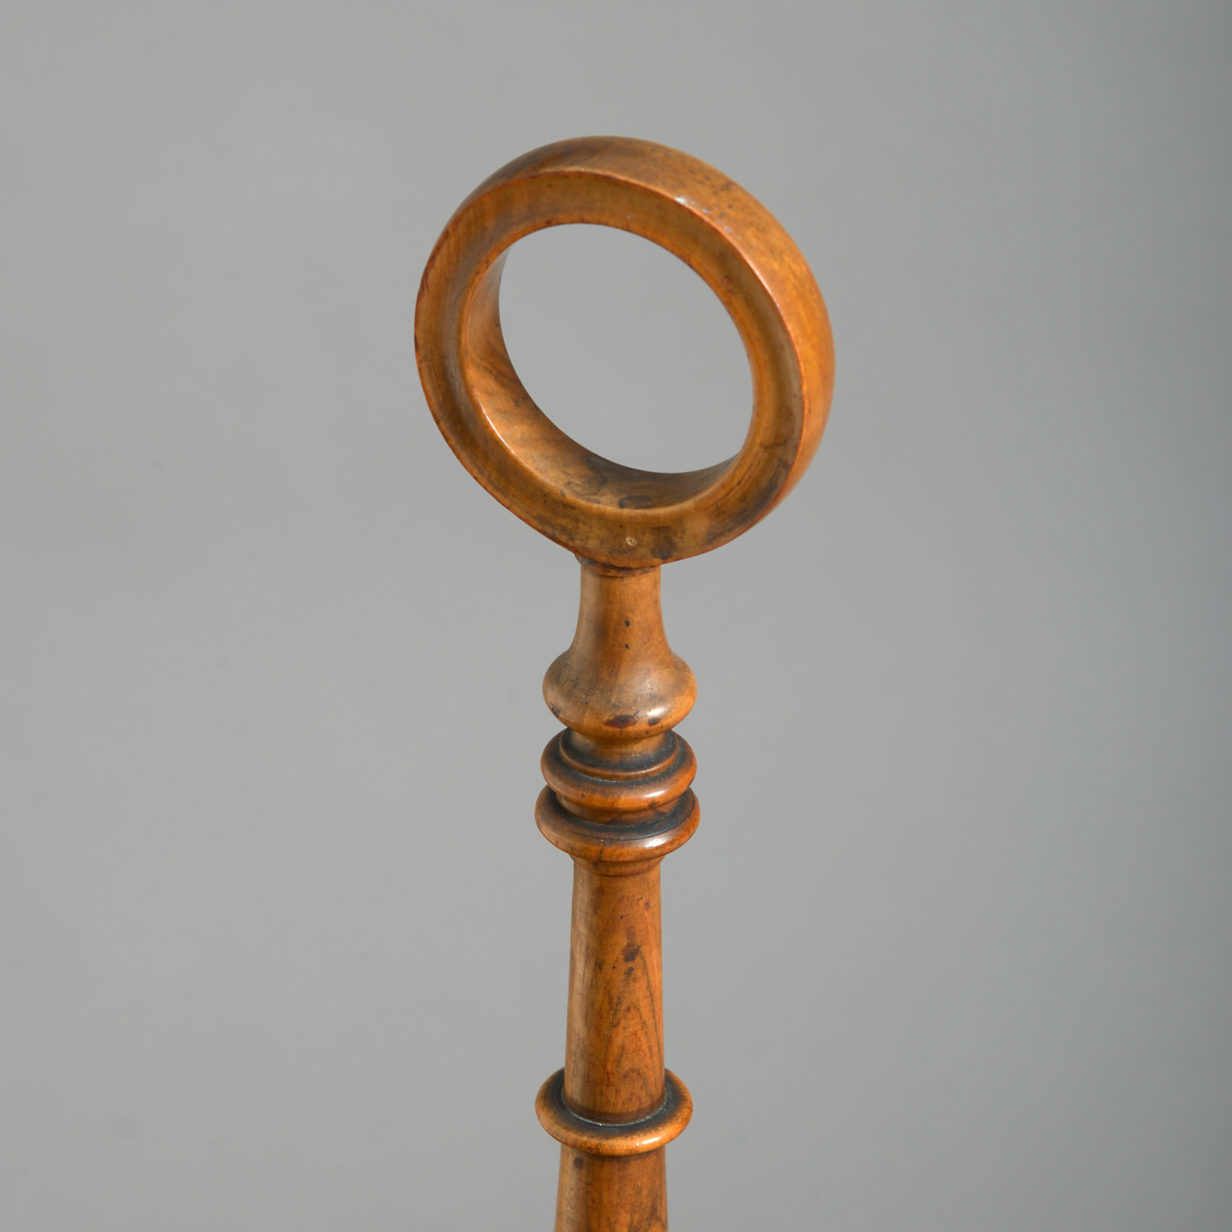 A 19th Century Turned Ship's Wheel Stick or Umbrella Stand